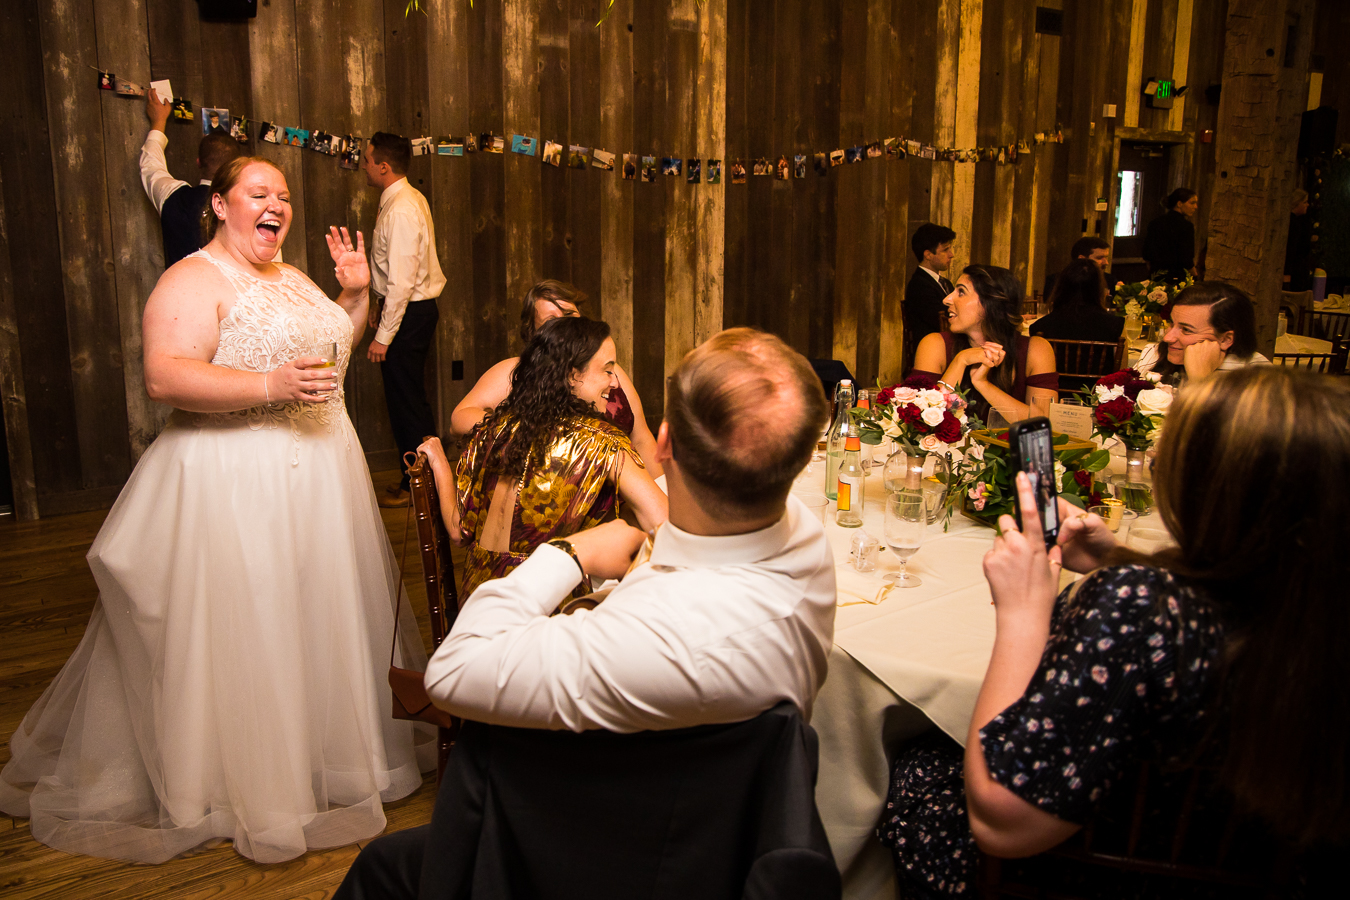 fun, candid image of the bride interacting with guests during this indoor wedding reception in stahlstown pa, with a clothesline picture timeline in the background behind her 